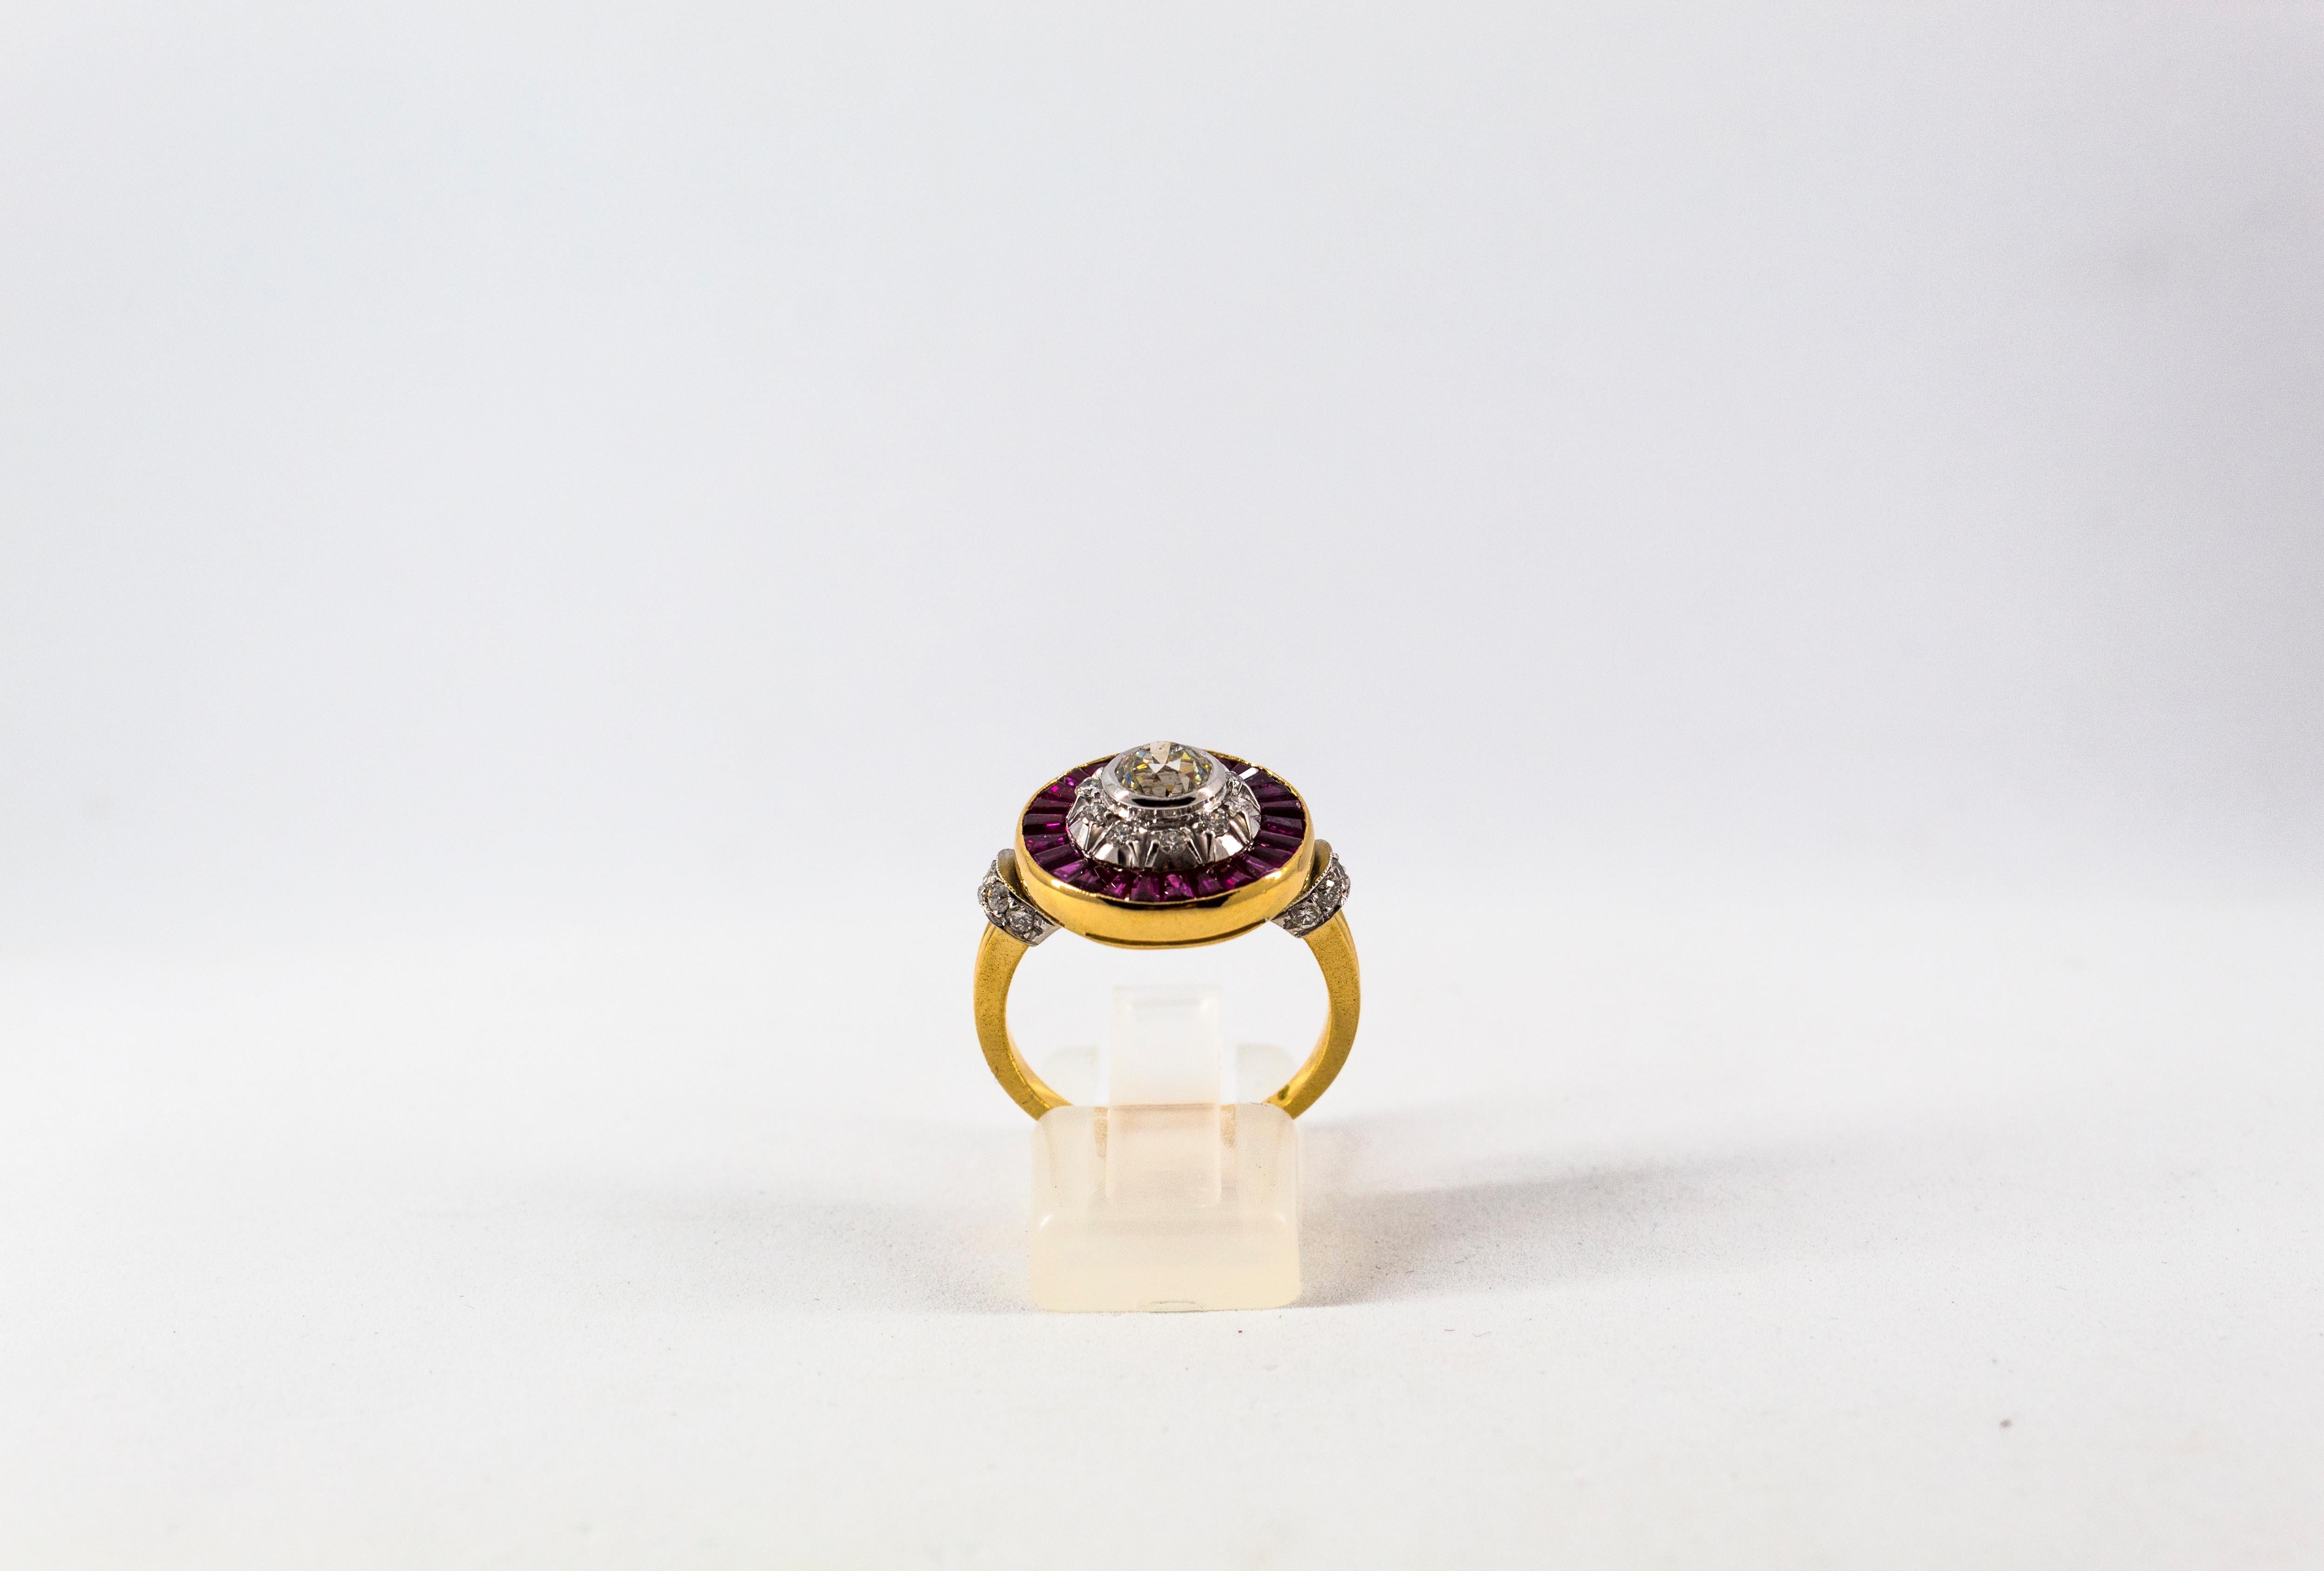 This Ring is inspired by Renaissance Style.
This Ring is made of 18K Yellow and White Gold.
This Ring has a 0.75 Carats White Diamond.
This Ring has also 0.40 Carats of White Diamonds.
This Ring has 1.35 Carats of Rubies.
Size ITA: 16 USA: 7.5
We're